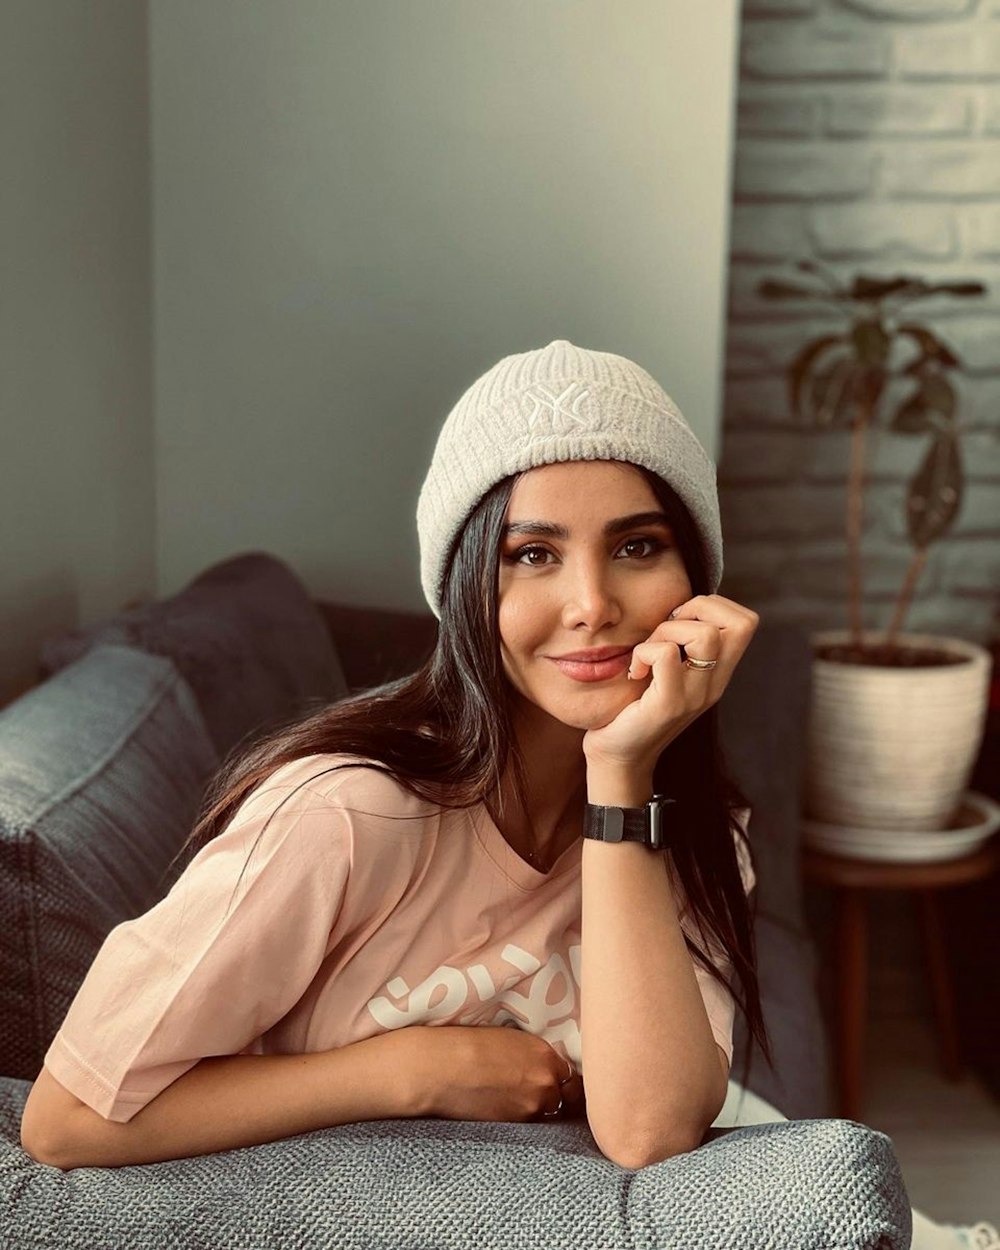 woman in pink shirt and white knit cap sitting on couch